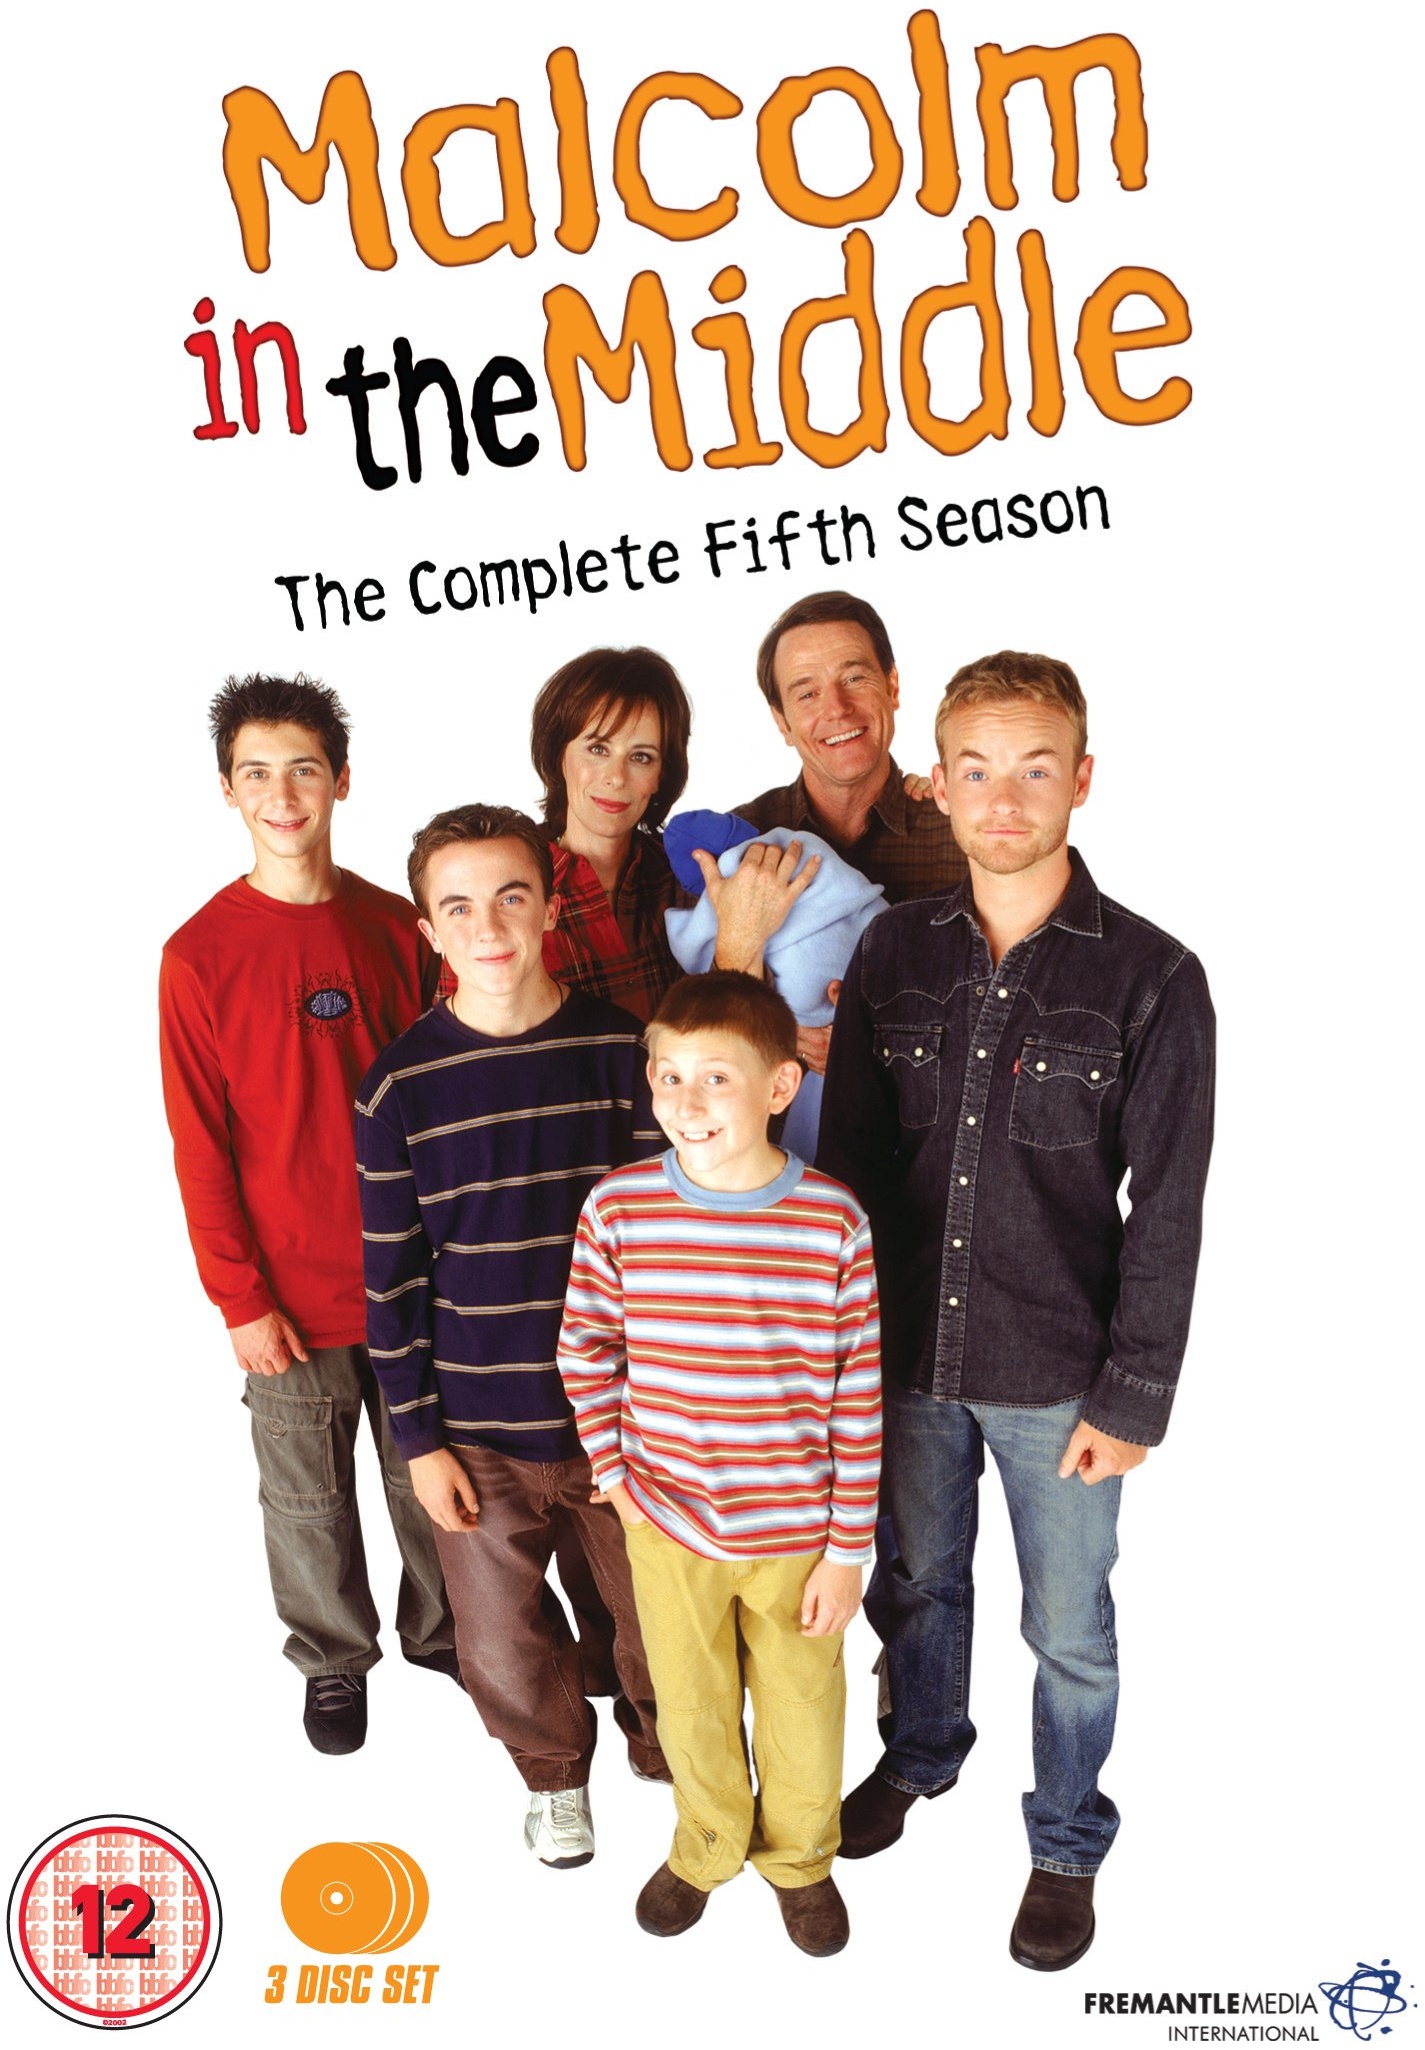 Malcolm in the Middle: The Complete Fifth Season [DVD]